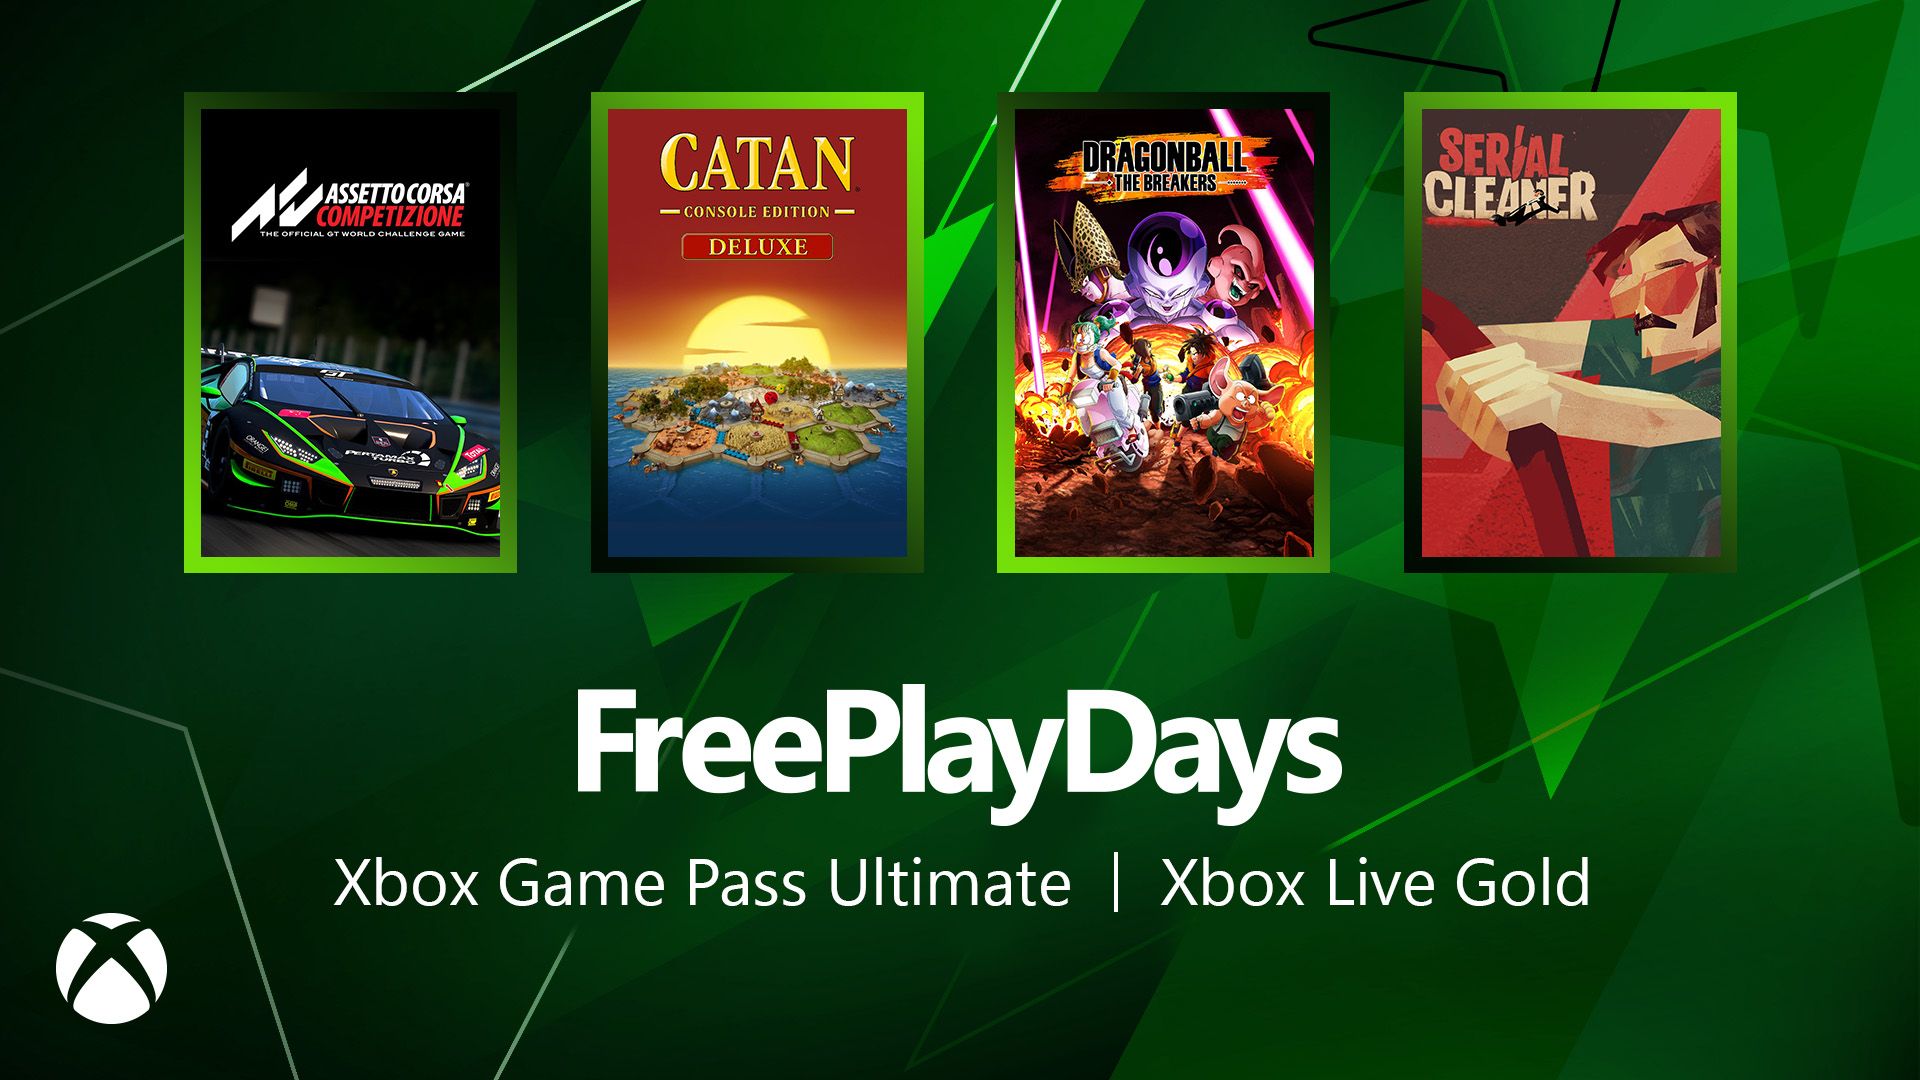 Free Play Days – Assetto Corsa Competizione, Catan (Console Version), Dragon Ball the Breakers, and Serial Cleaner